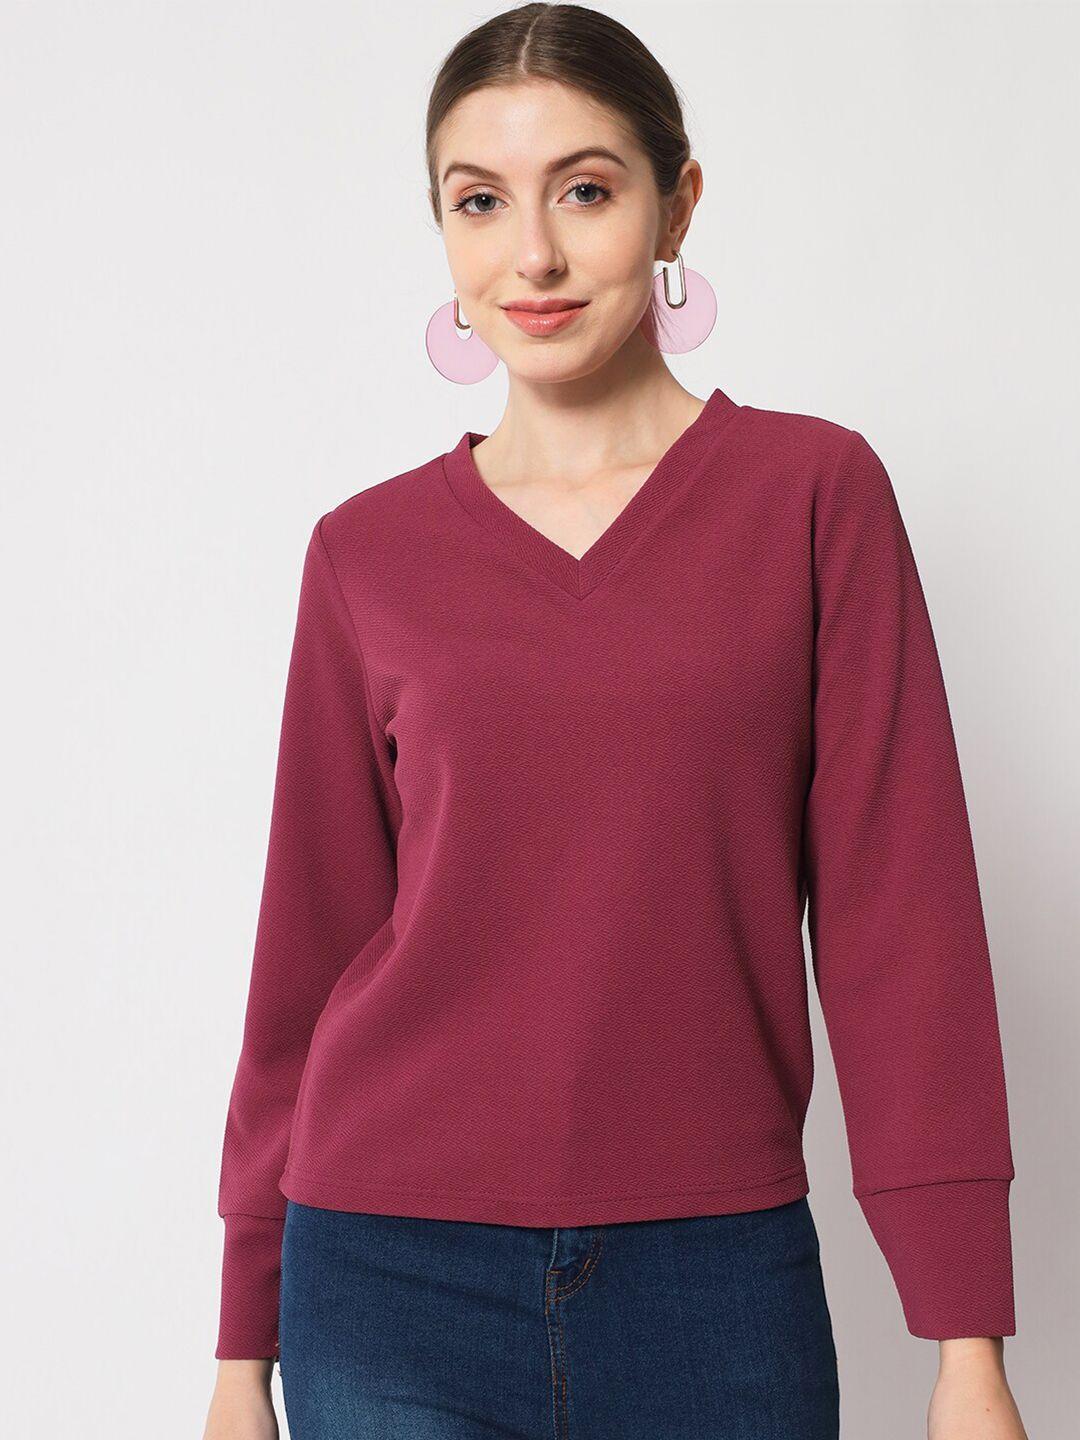 chemistry v-neck cuffed sleeves top